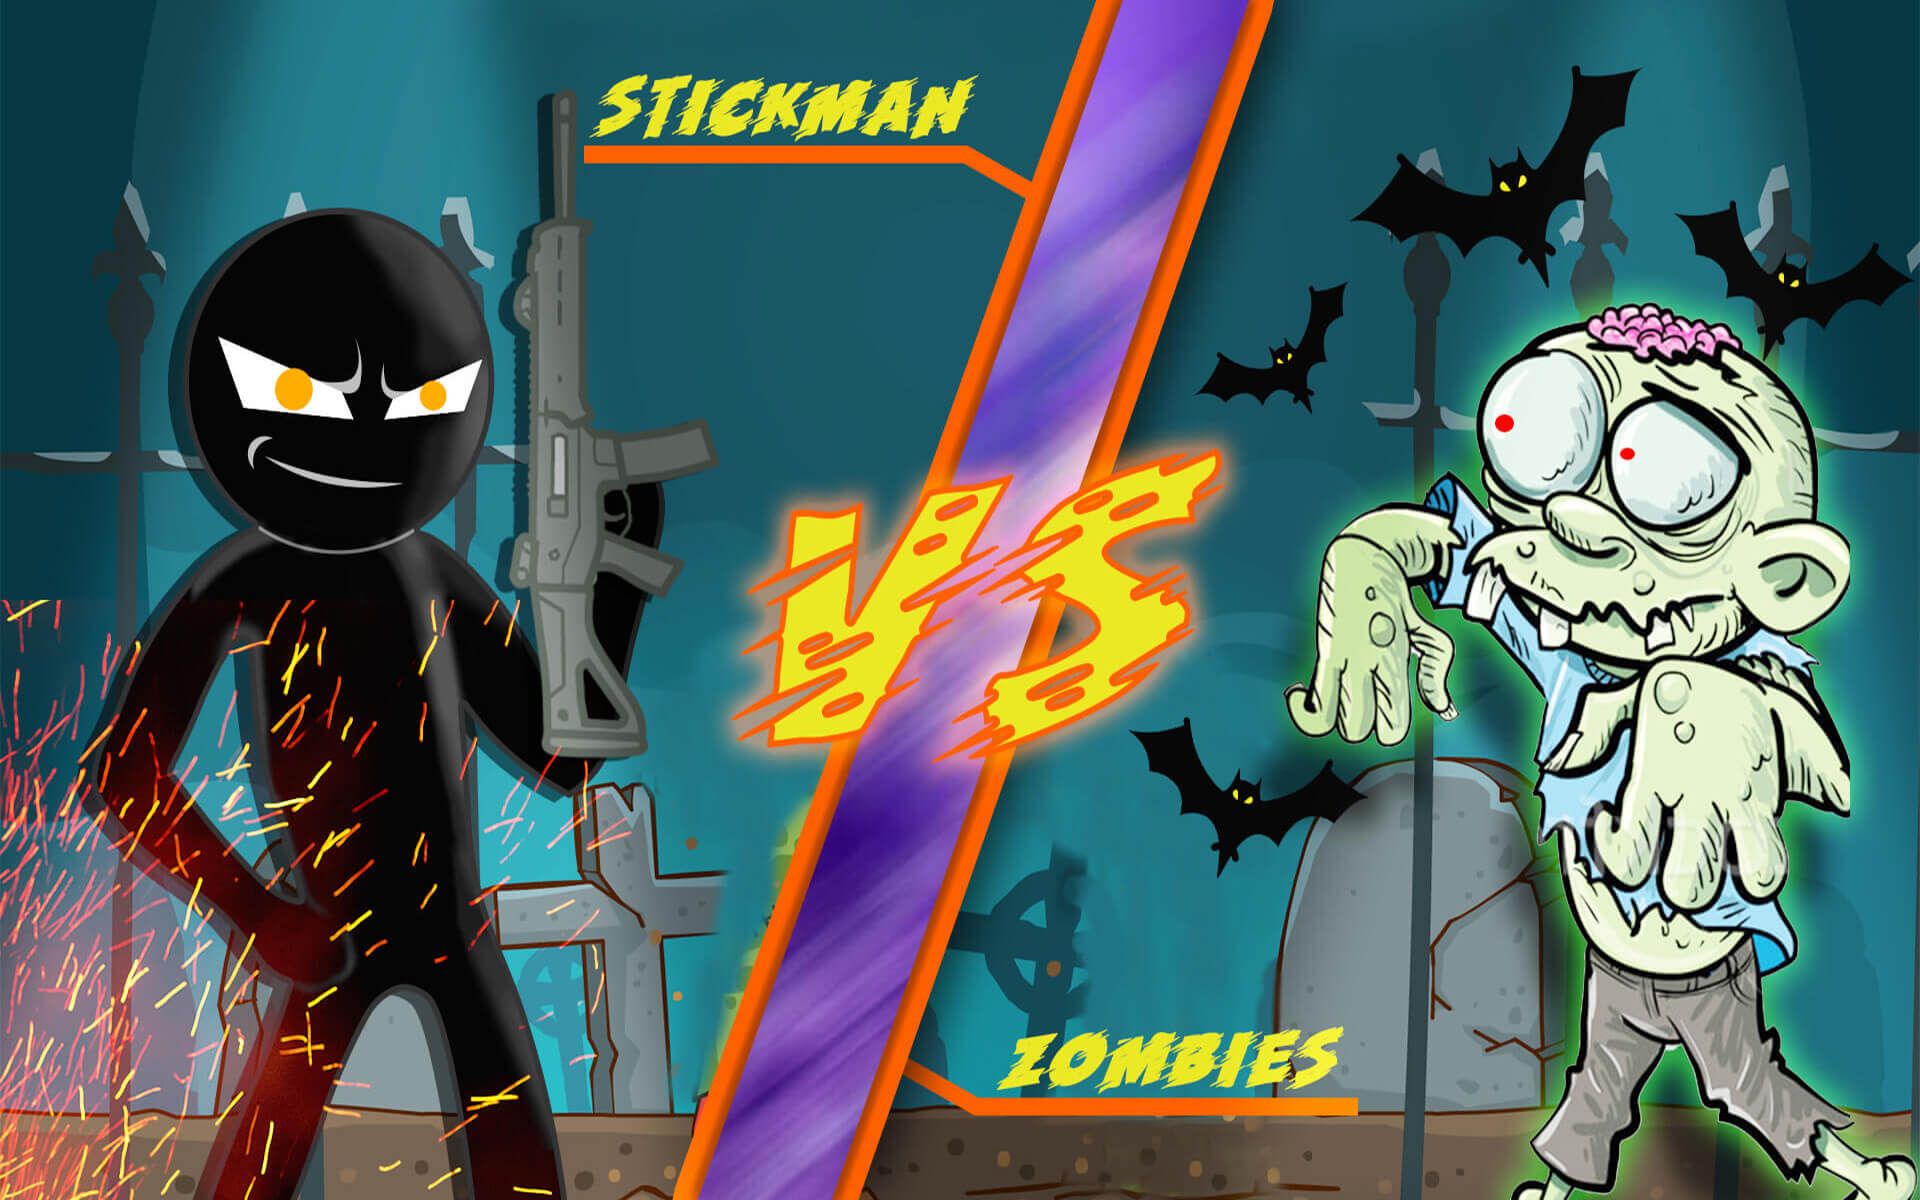 Zombie War Stickman Fighting, FPS Shooting Game: Amazon.ca: Appstore for Android